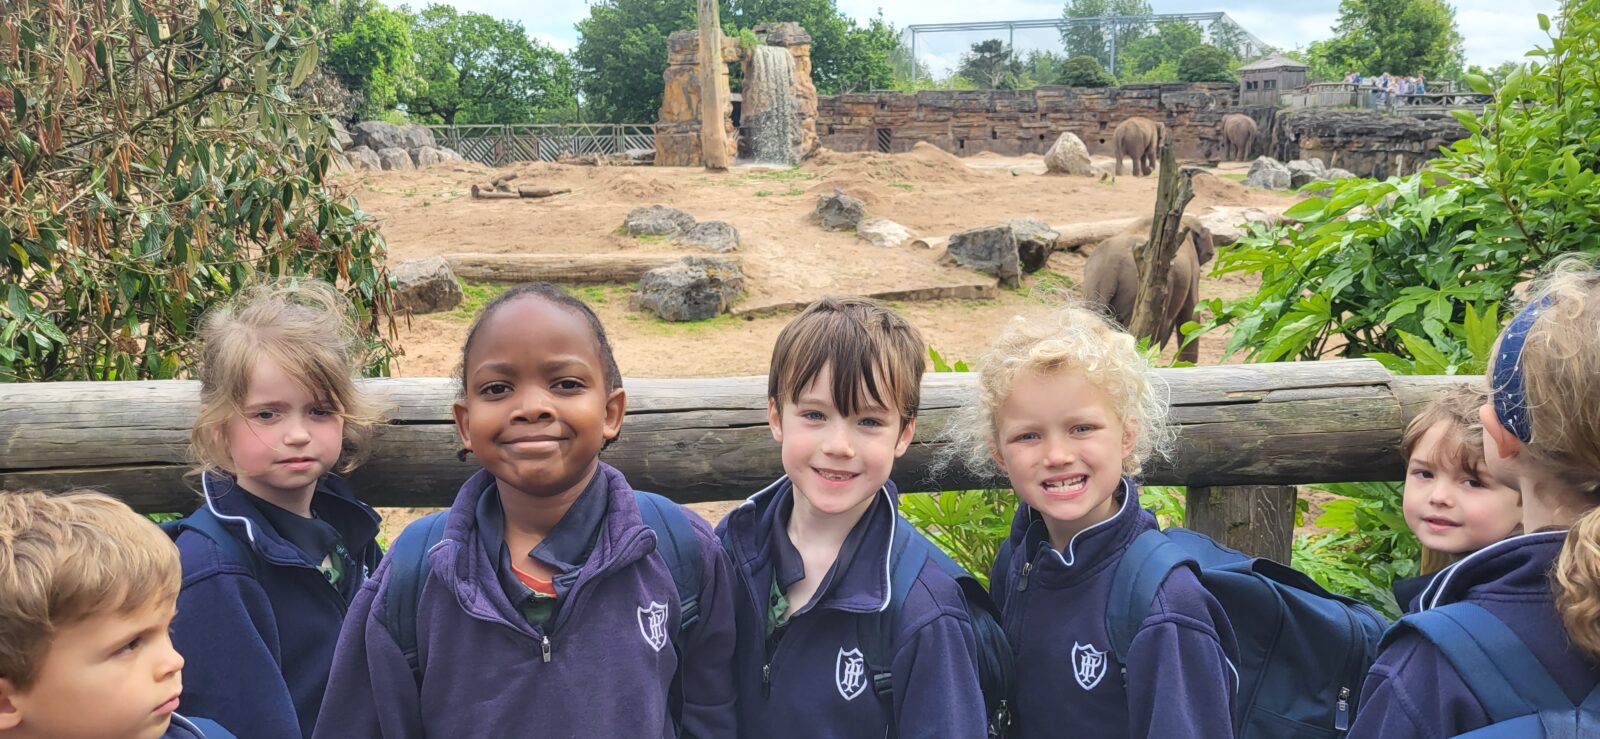 Group of children visiting Chester Zoo with animals in the background